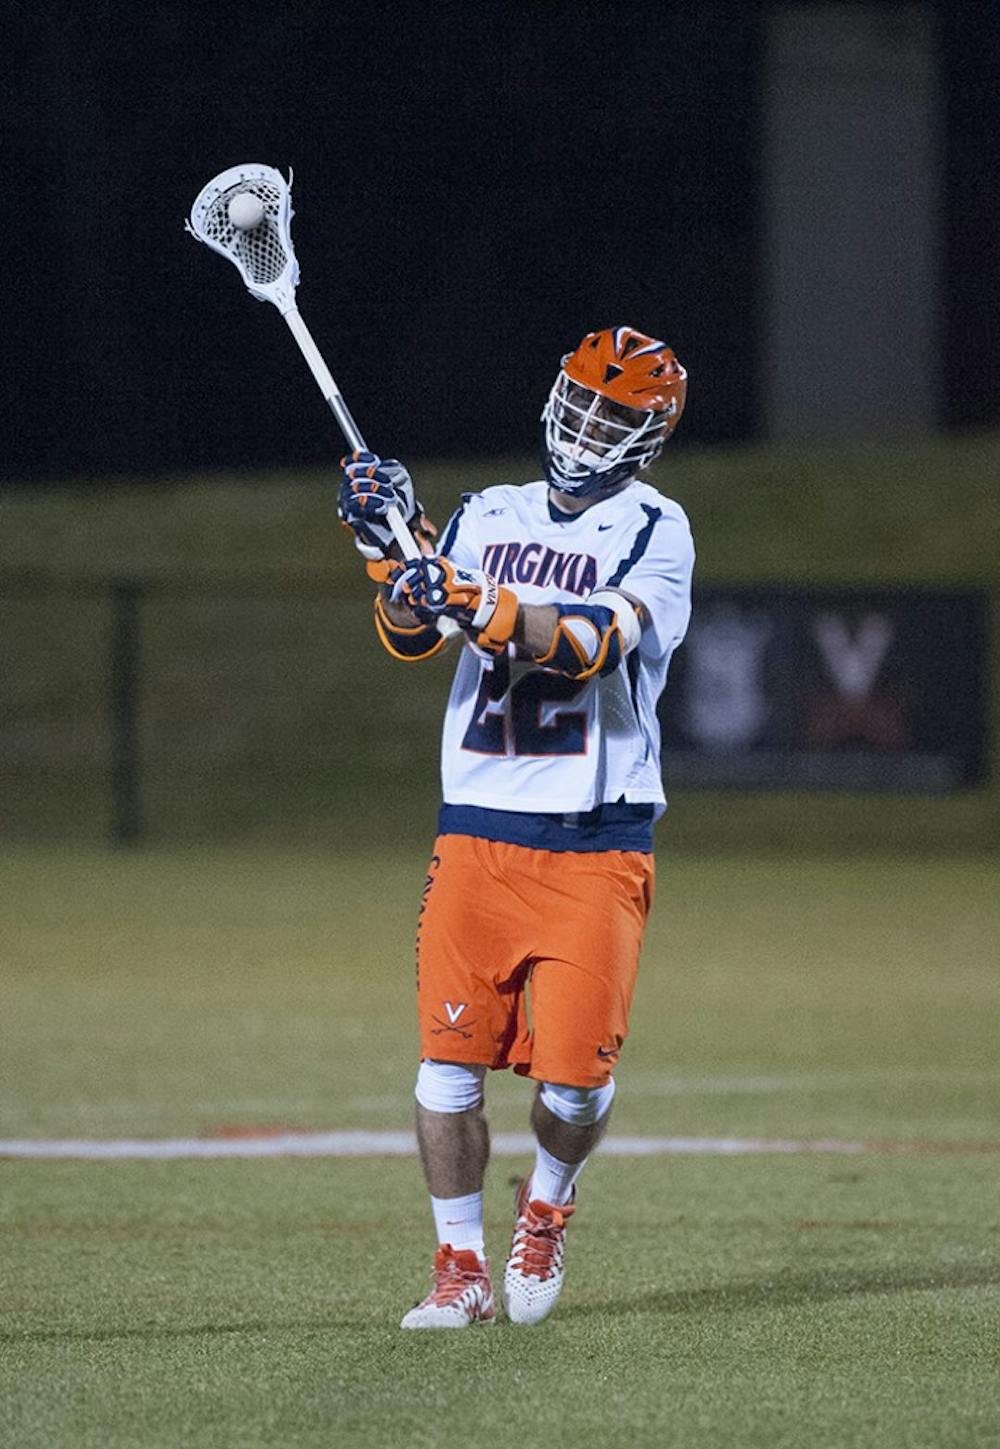 <p>Freshman midfielder Ryan Conrad, the No. 1 recruit in his class, scored two goals and recorded an assist Sunday. He now has at least one goal in all four games for Virginia.</p>